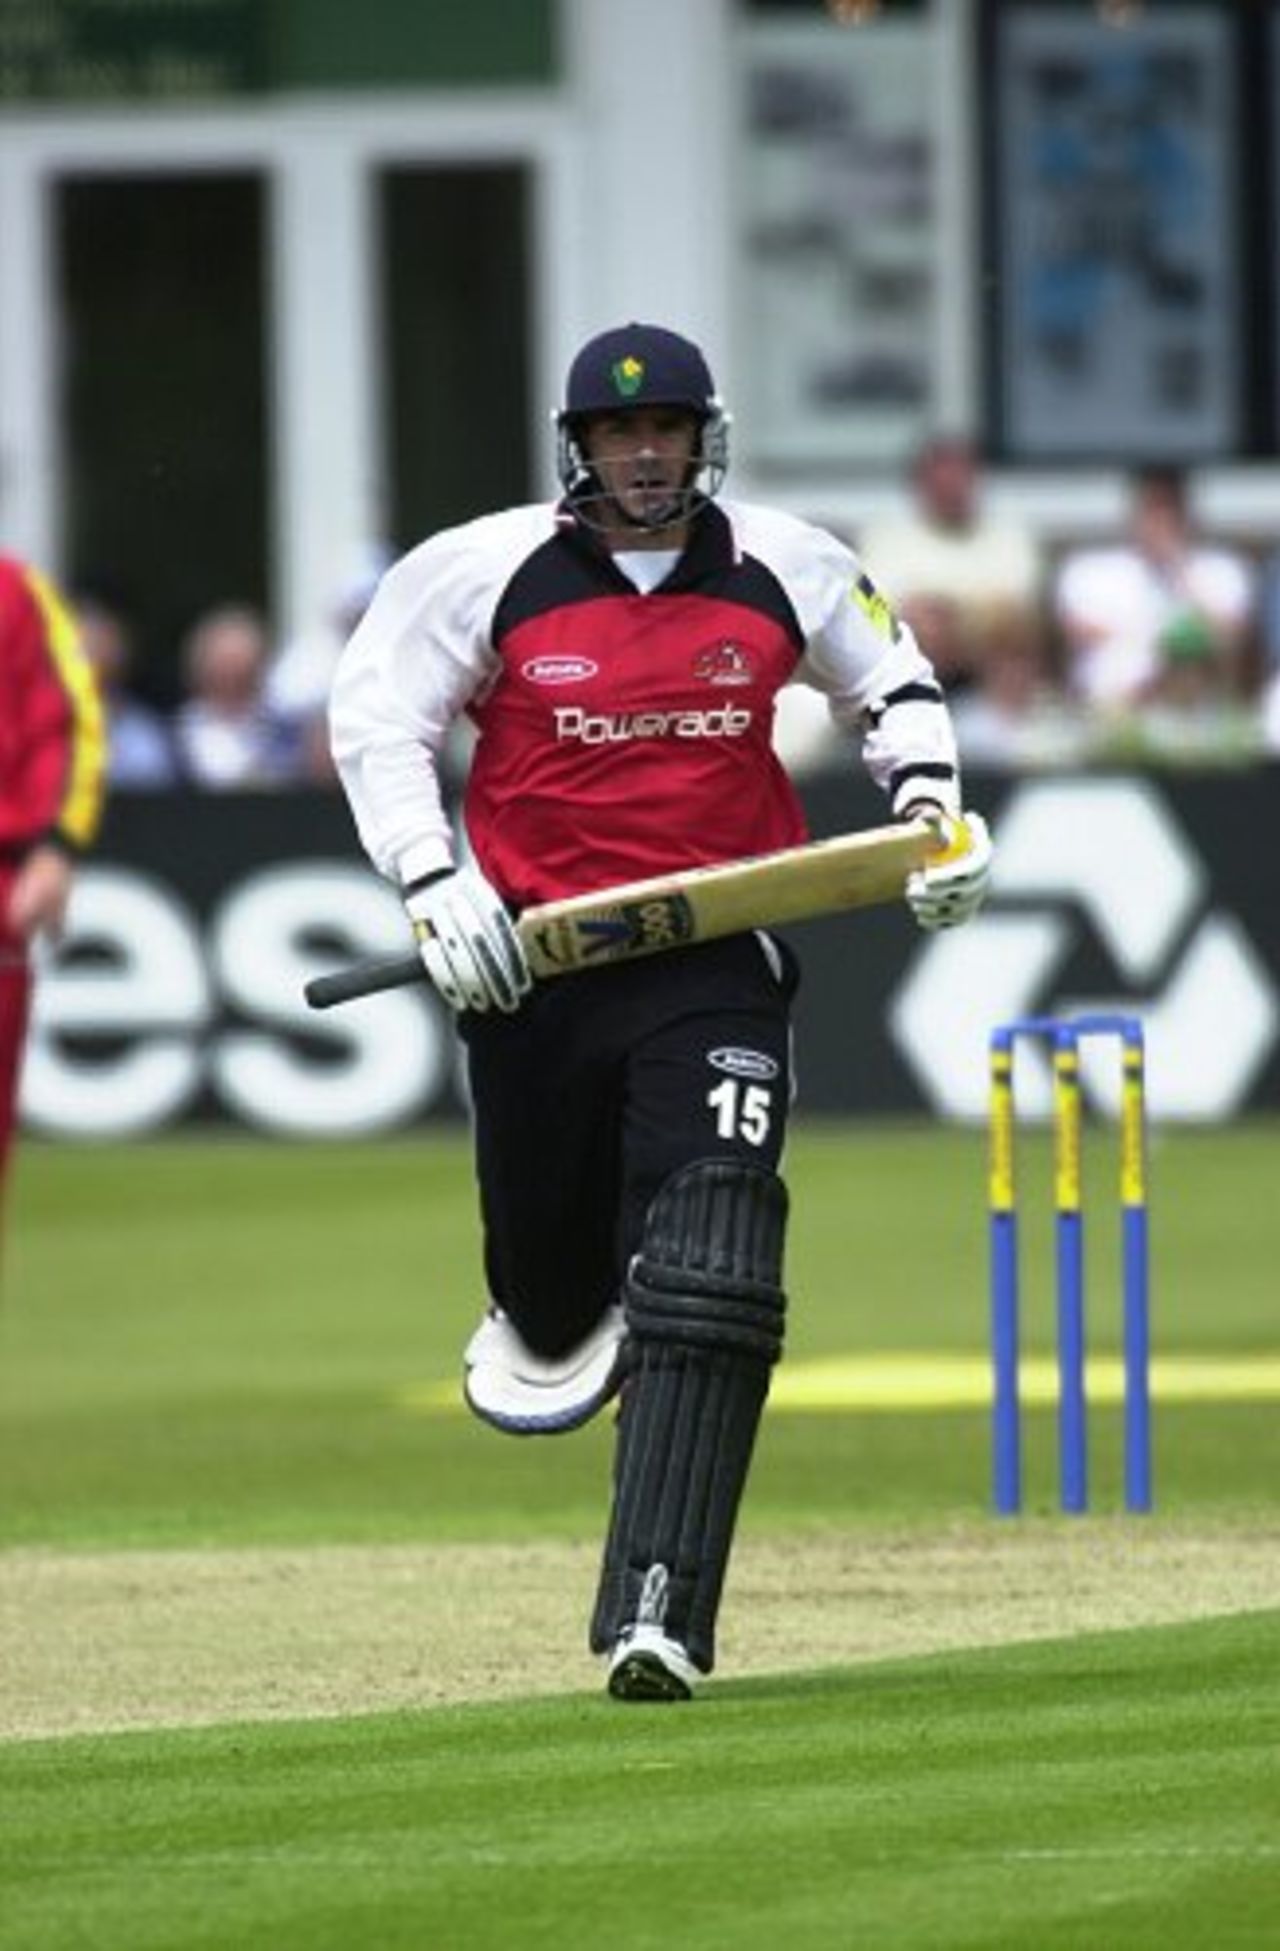 Steve James of Glamorgan playing in the Norwich Union League